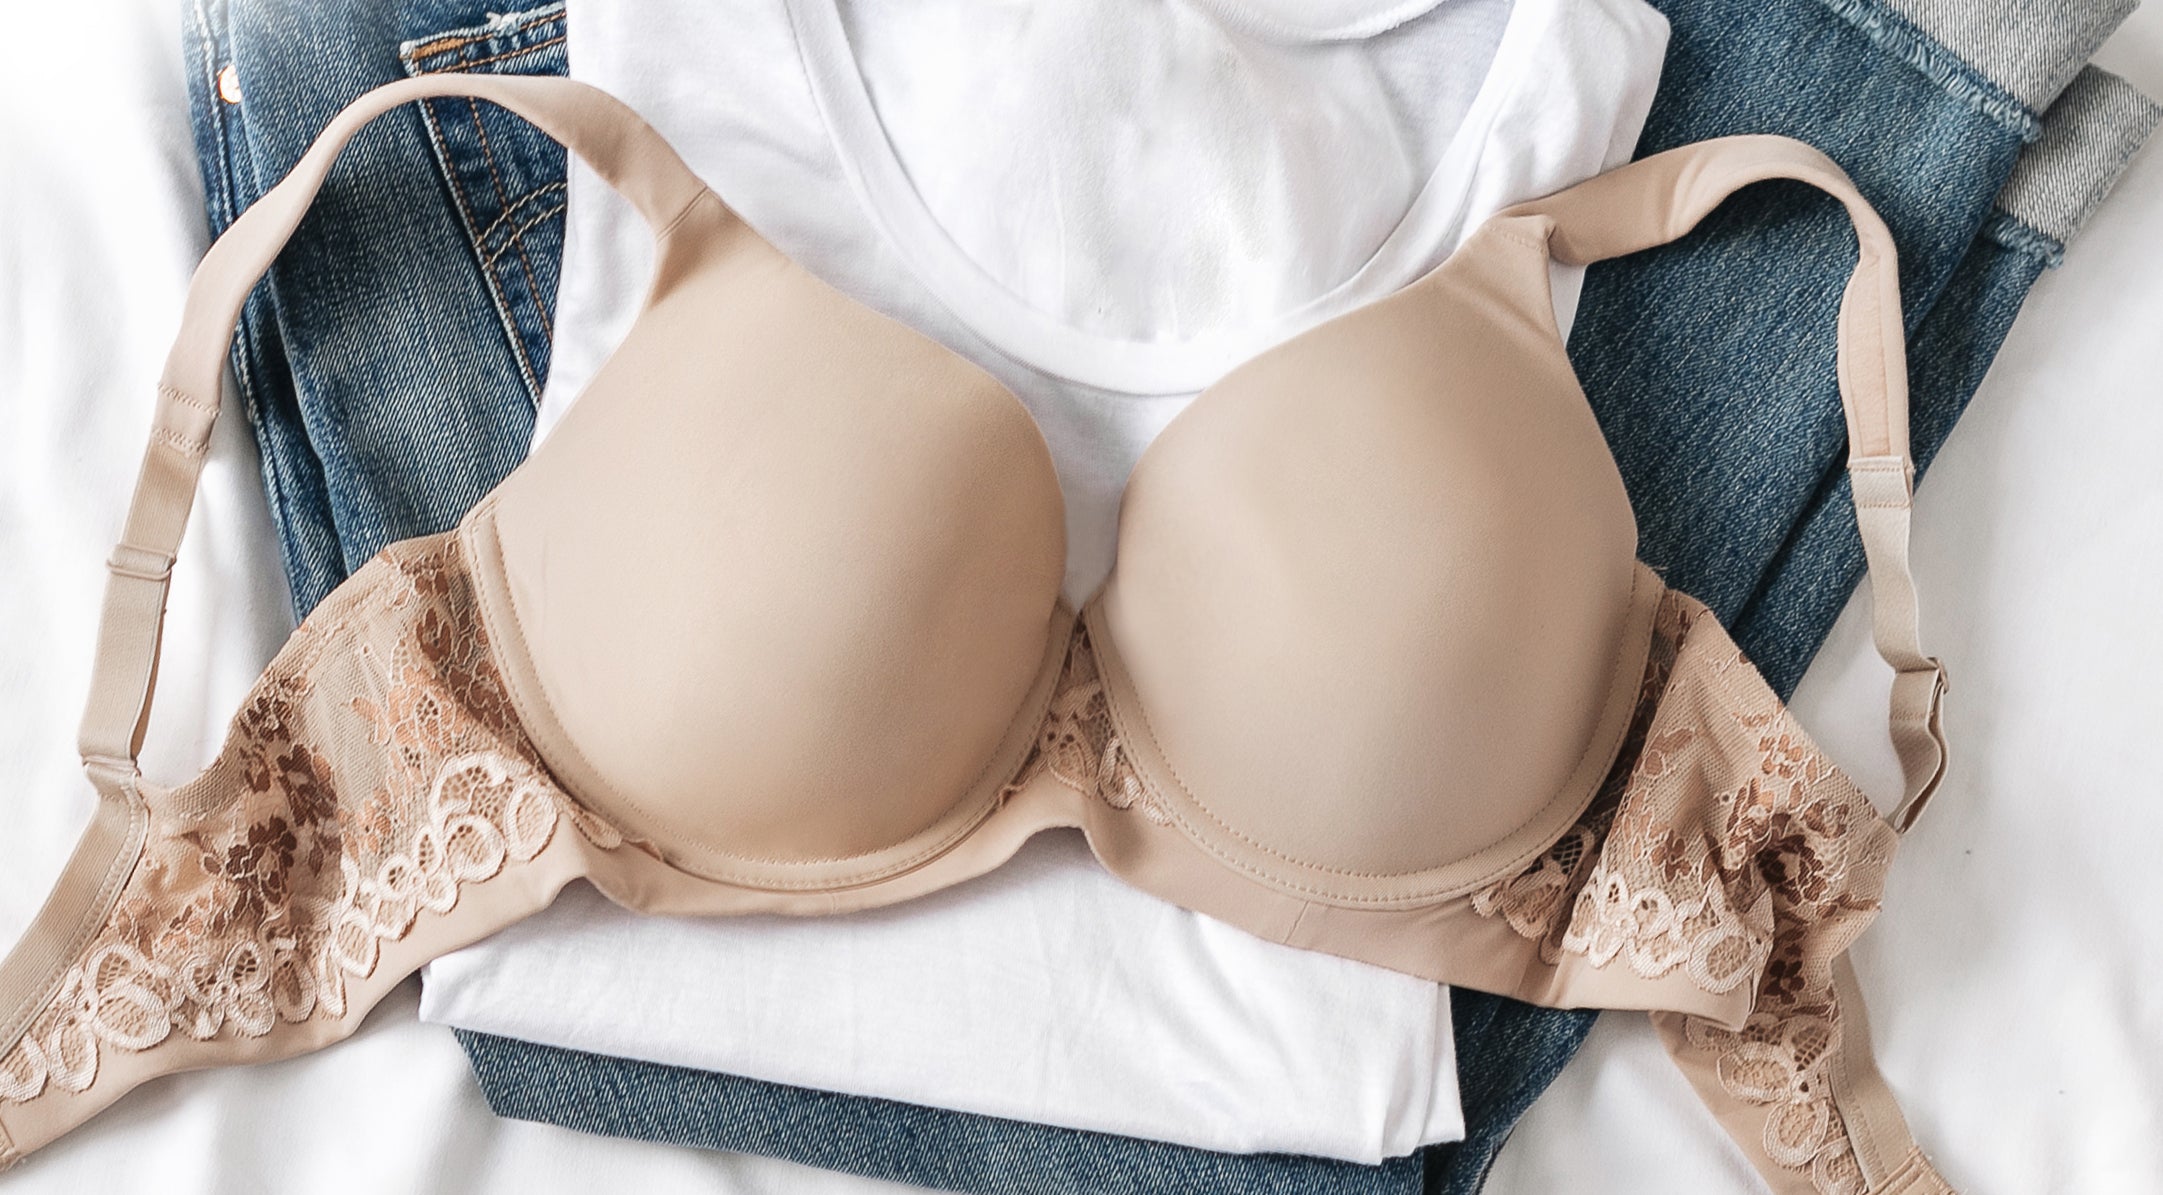 Seamed Bra Benefits for Full-Figure Women Wanting Support, Lift